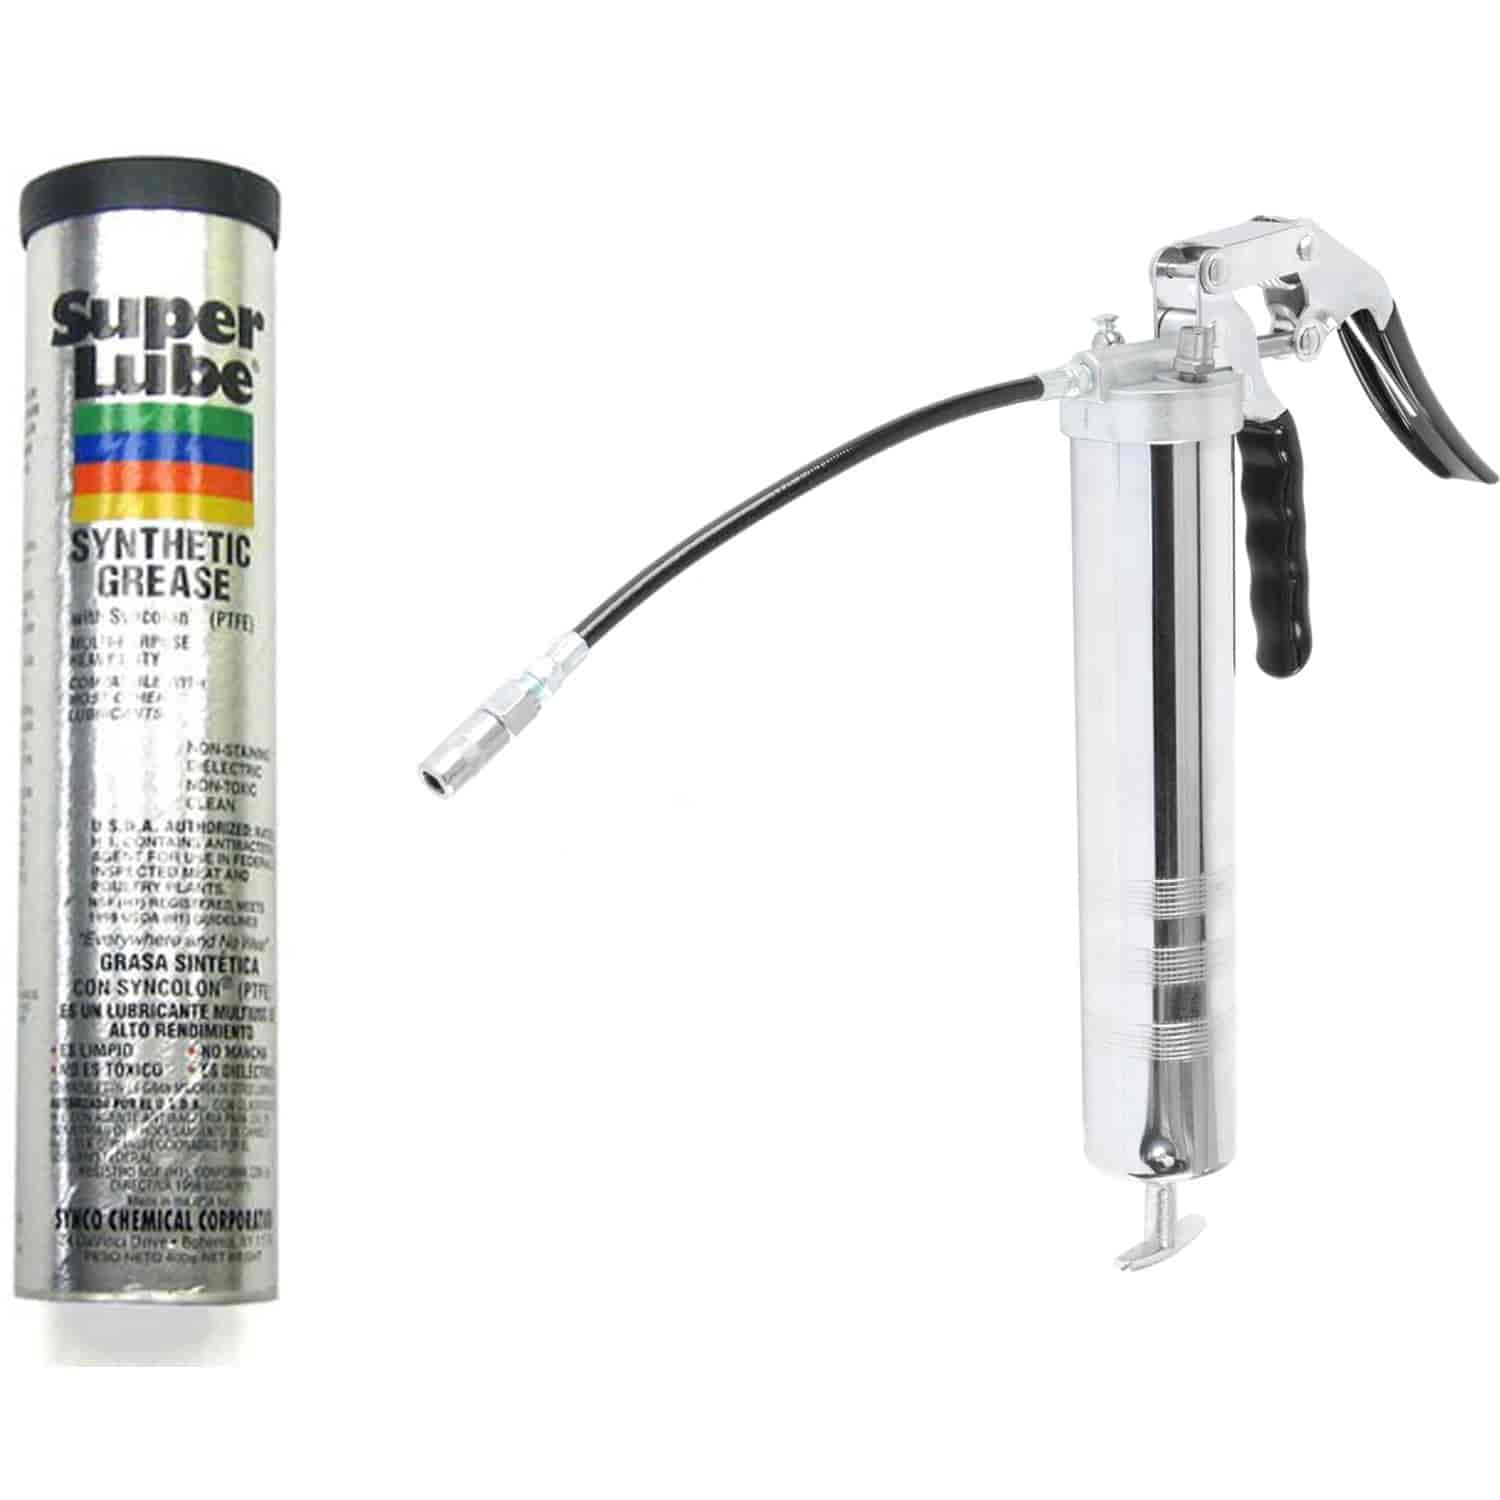 UMI Performance Super Lube Synthetic Grease and Gun Kit